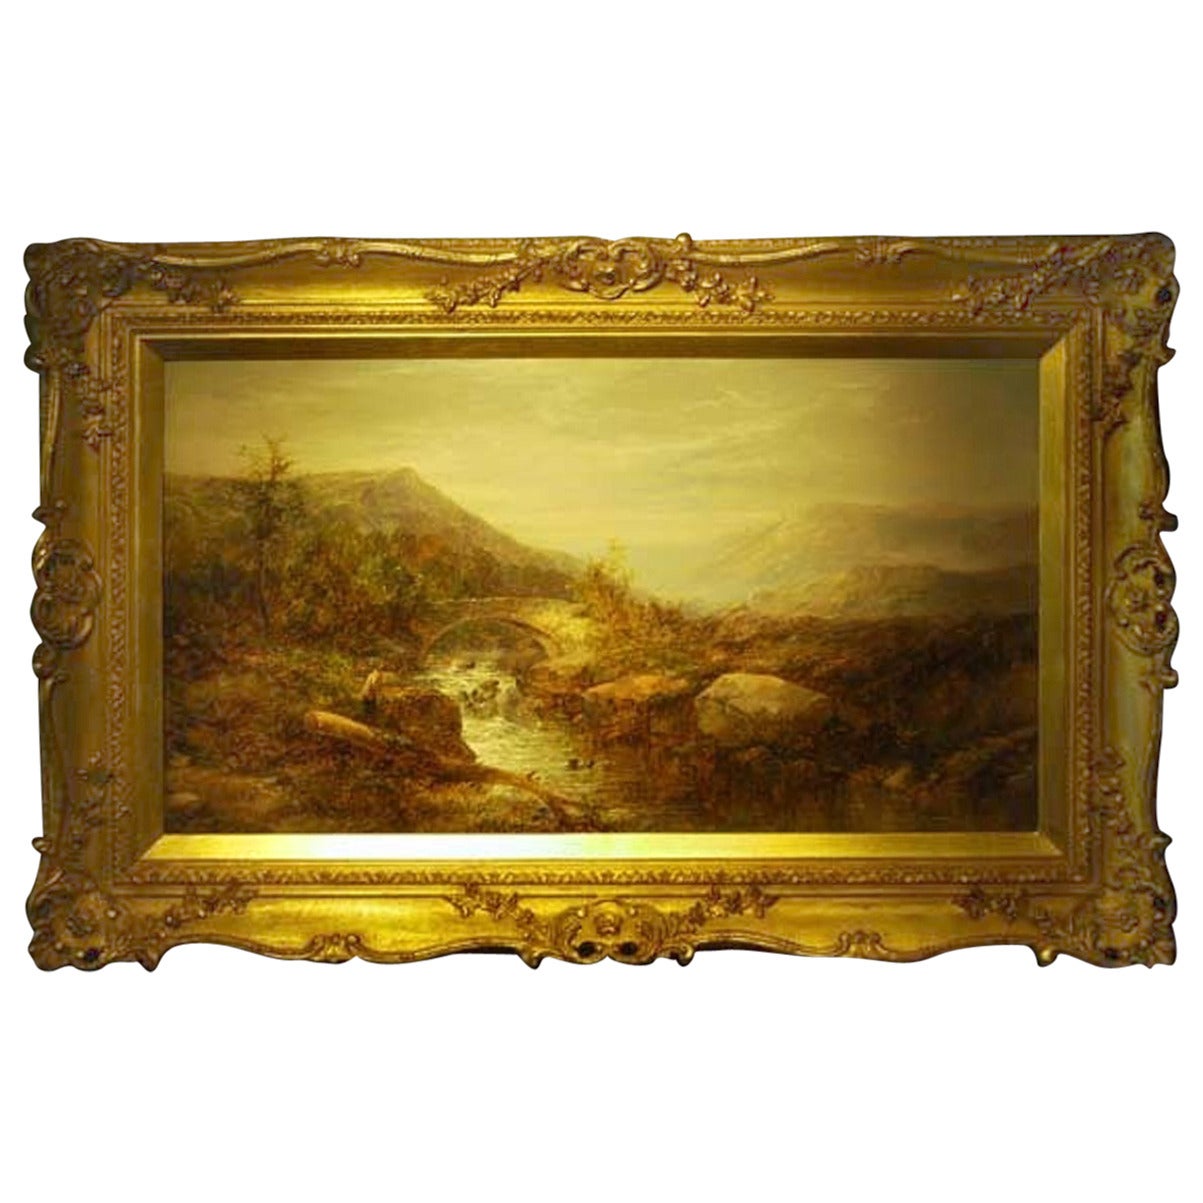 “Angler on the Bank of a Mountain River, with a Bridge and Mountains Beyond” For Sale